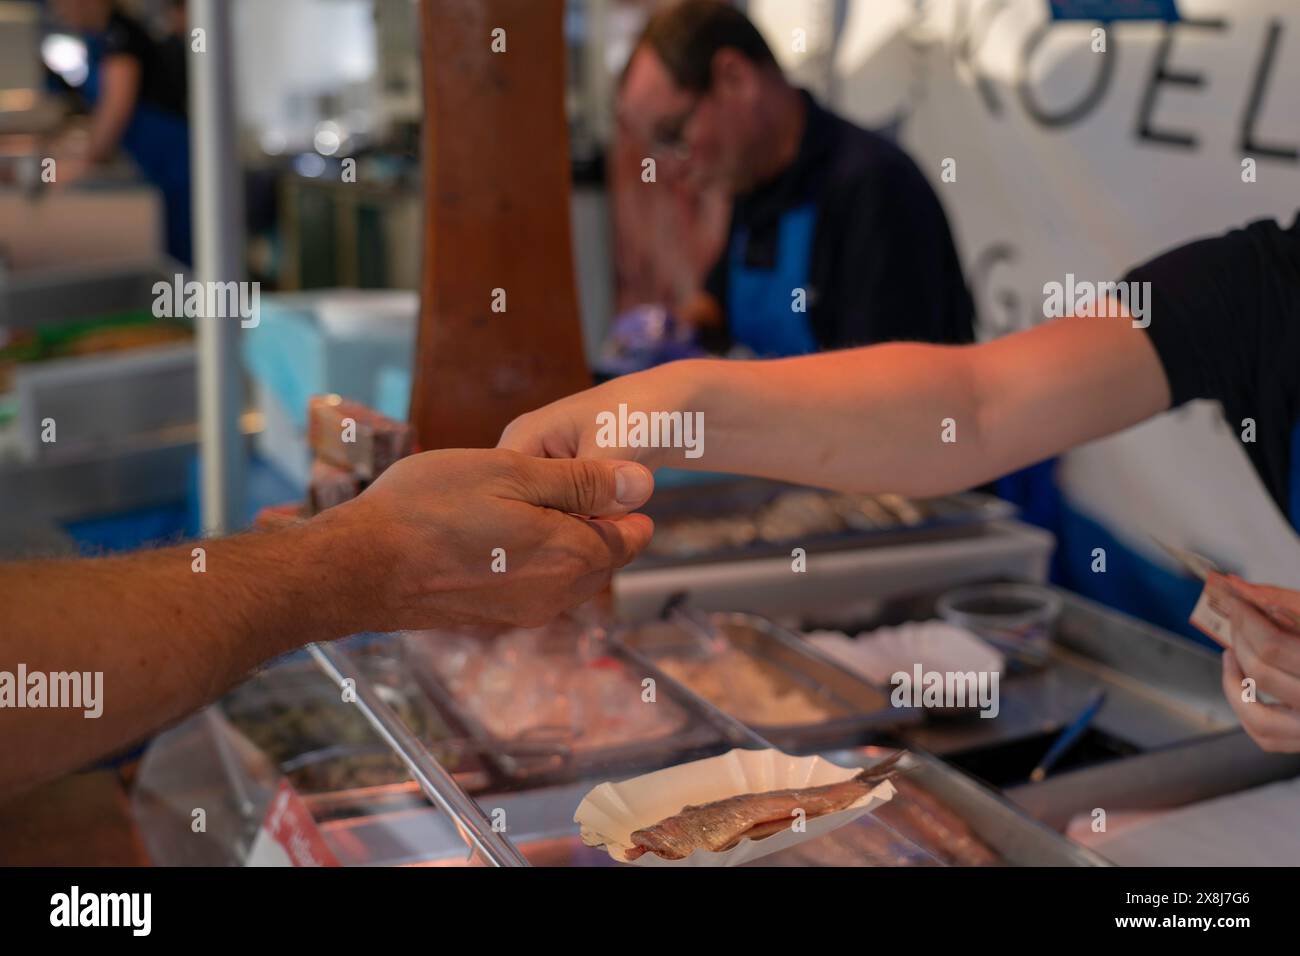 Paying for food at a market, handing over money Stock Photo